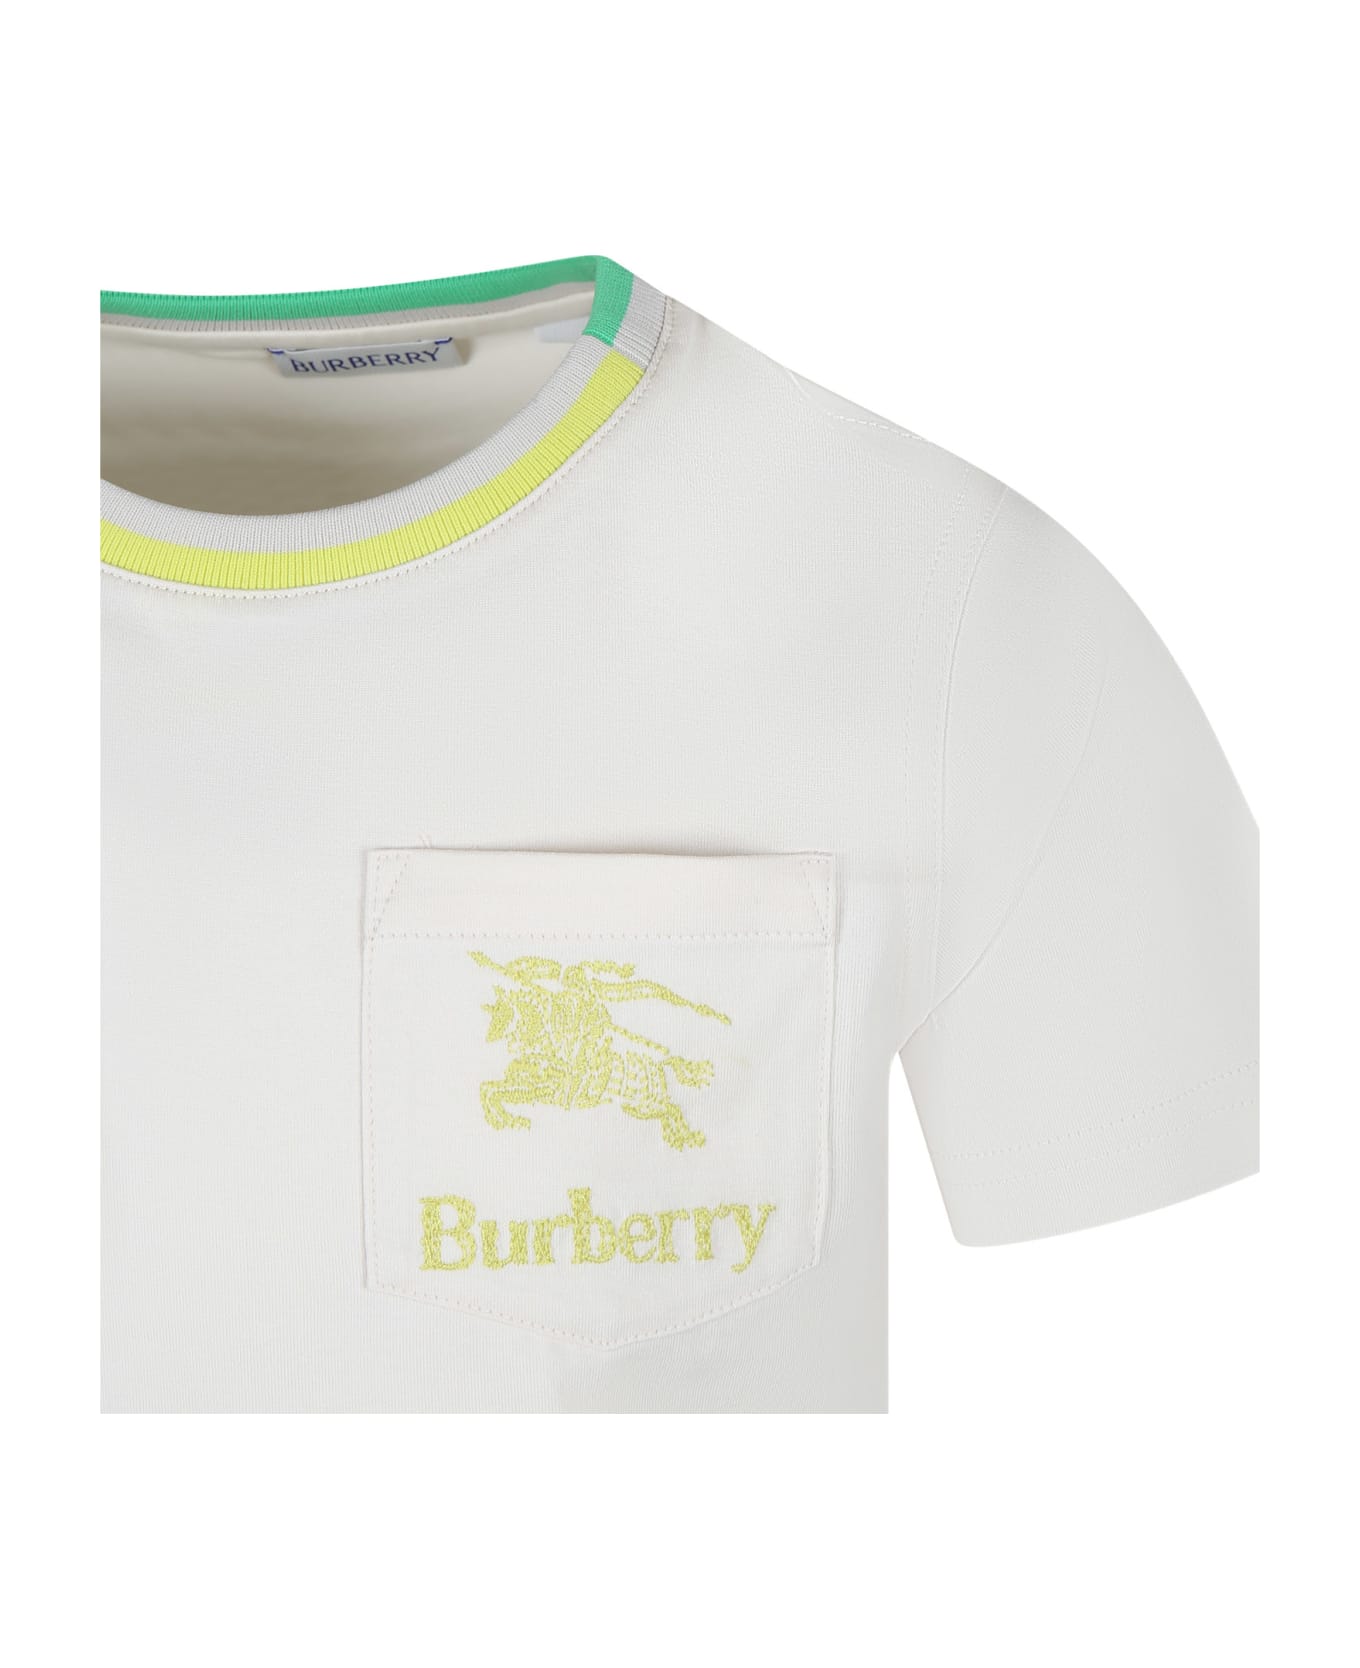 Burberry Beige T-shirt For Boy With Logo And Equestrian Knight - Beige